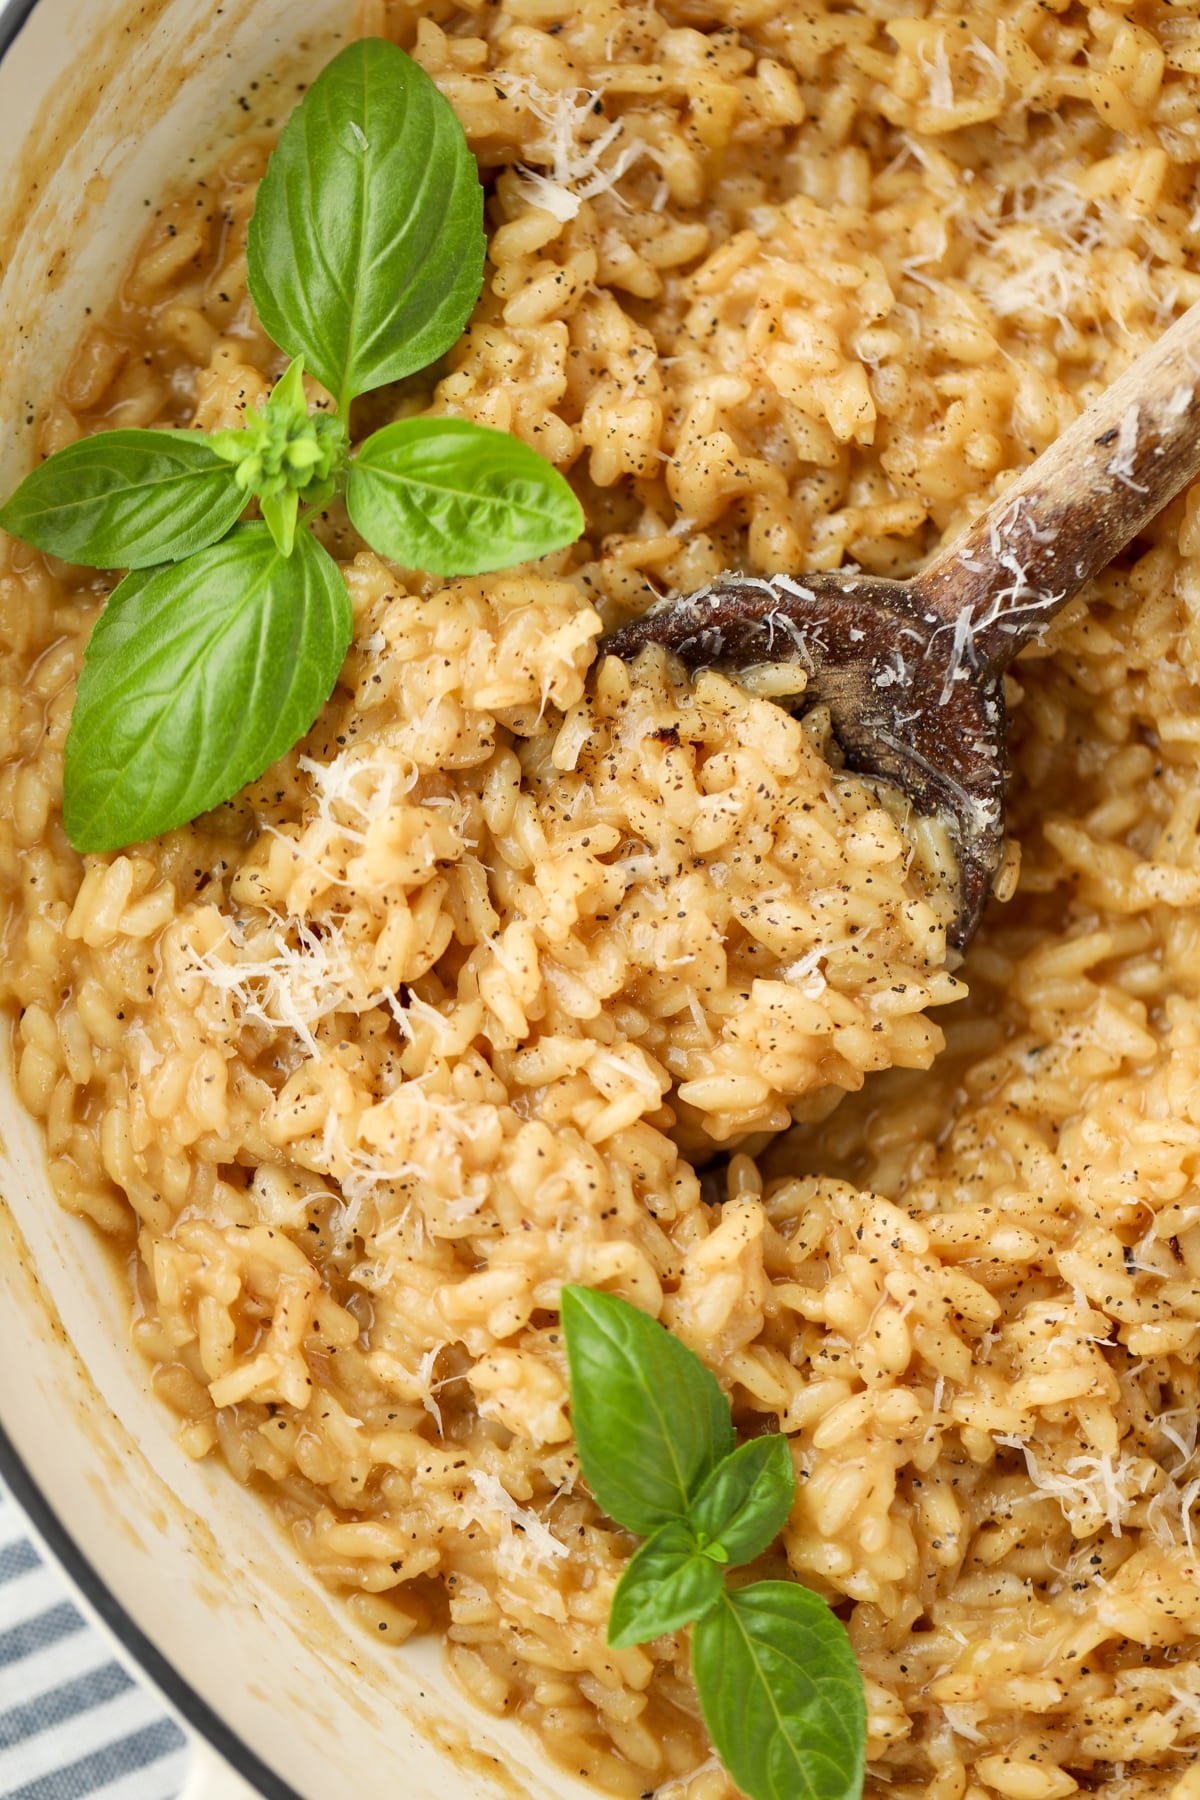 A wooden spoon serving up a portion of risotto garnished with basil.